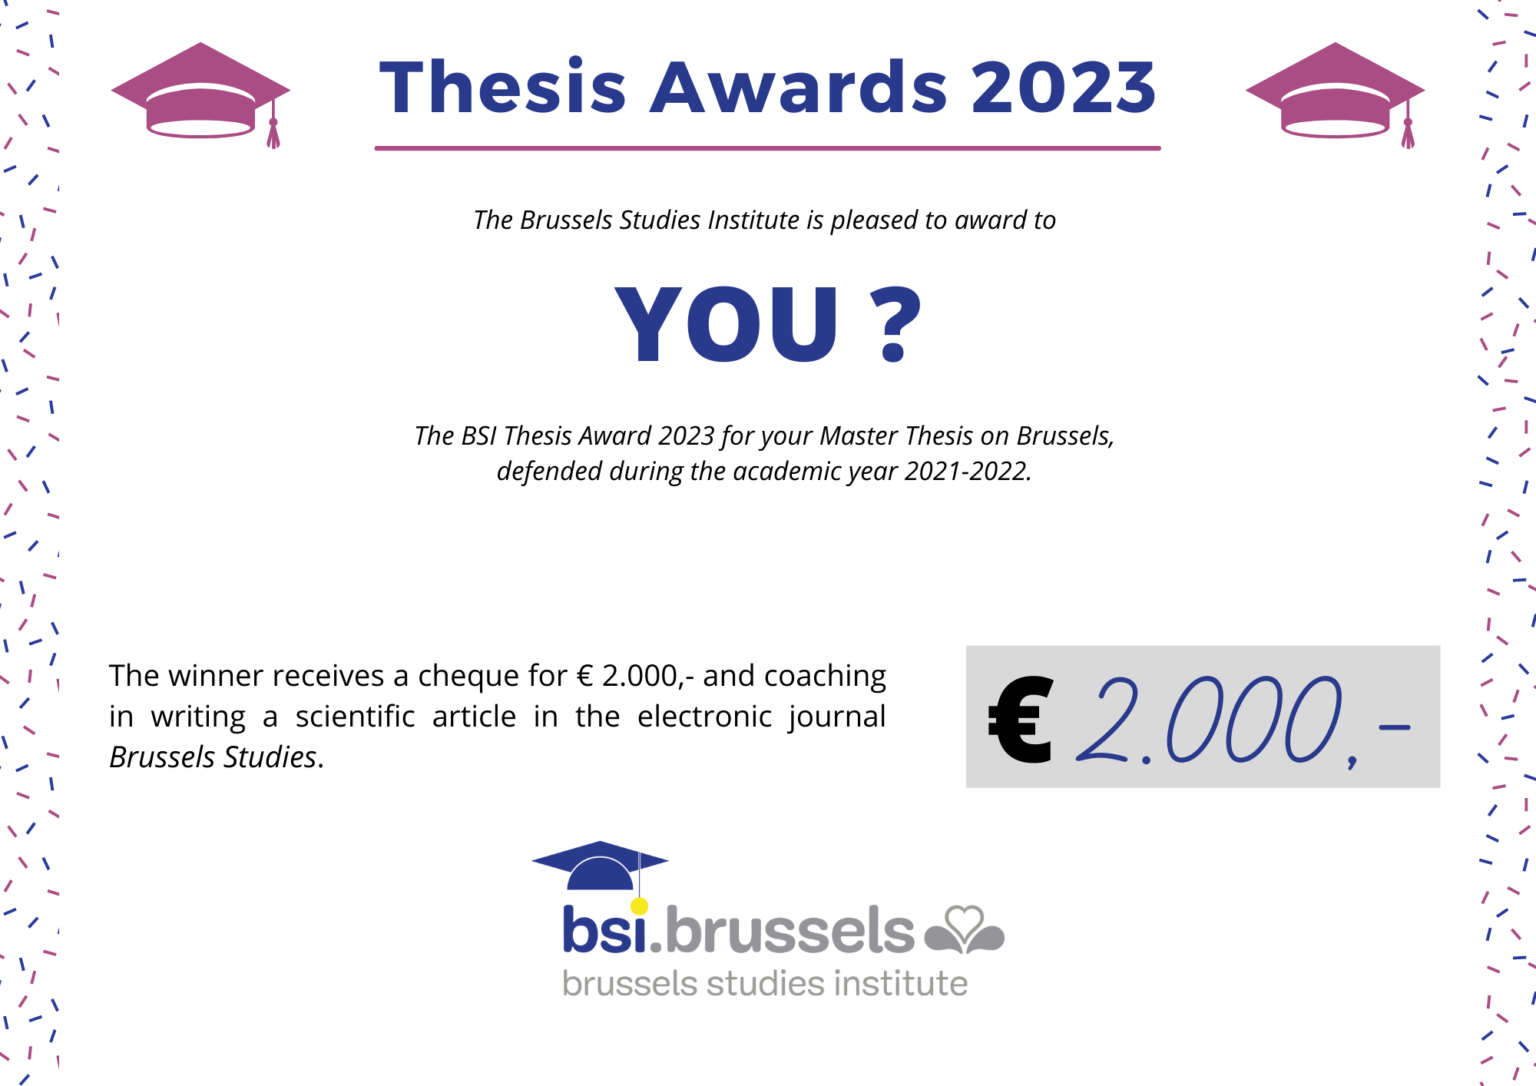 Thesis Awards 2023_SoMe